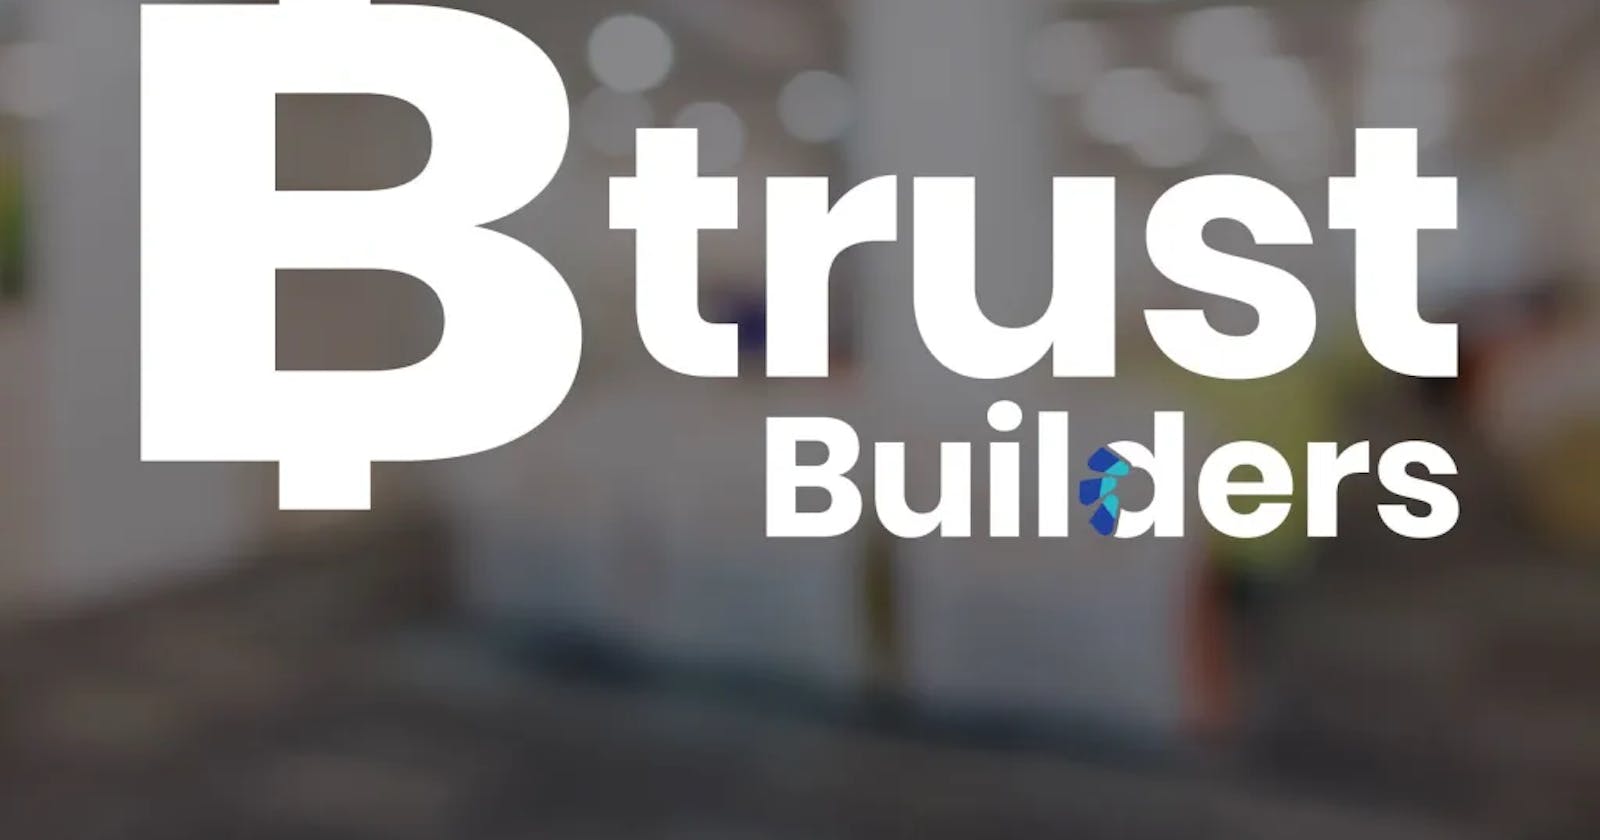 Charting New Horizons: The BTrust Builders Fellowship Journey Experience